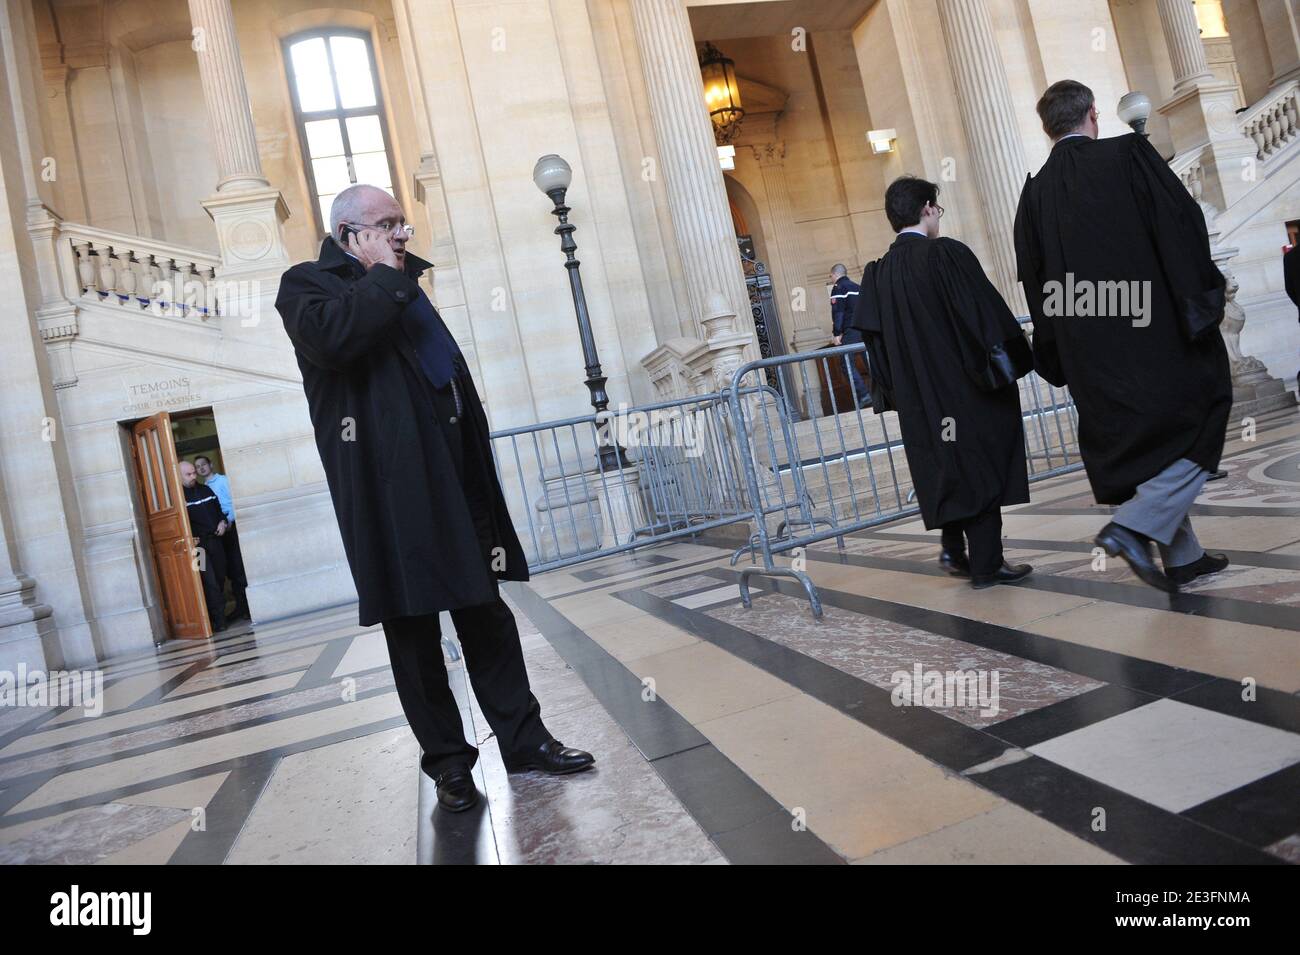 Yvan Colonna's laywers Antoine Sollacaro at the Paris courthouse, France, on March 16, 2009. Antoine Sollacaro refuses to appear again in protest against the refusal of the court to hold a reconstitution of the murder of Erignac in Ajaccio, Corsica. Photo by Mousse/ABACAPRESS.COM Stock Photo